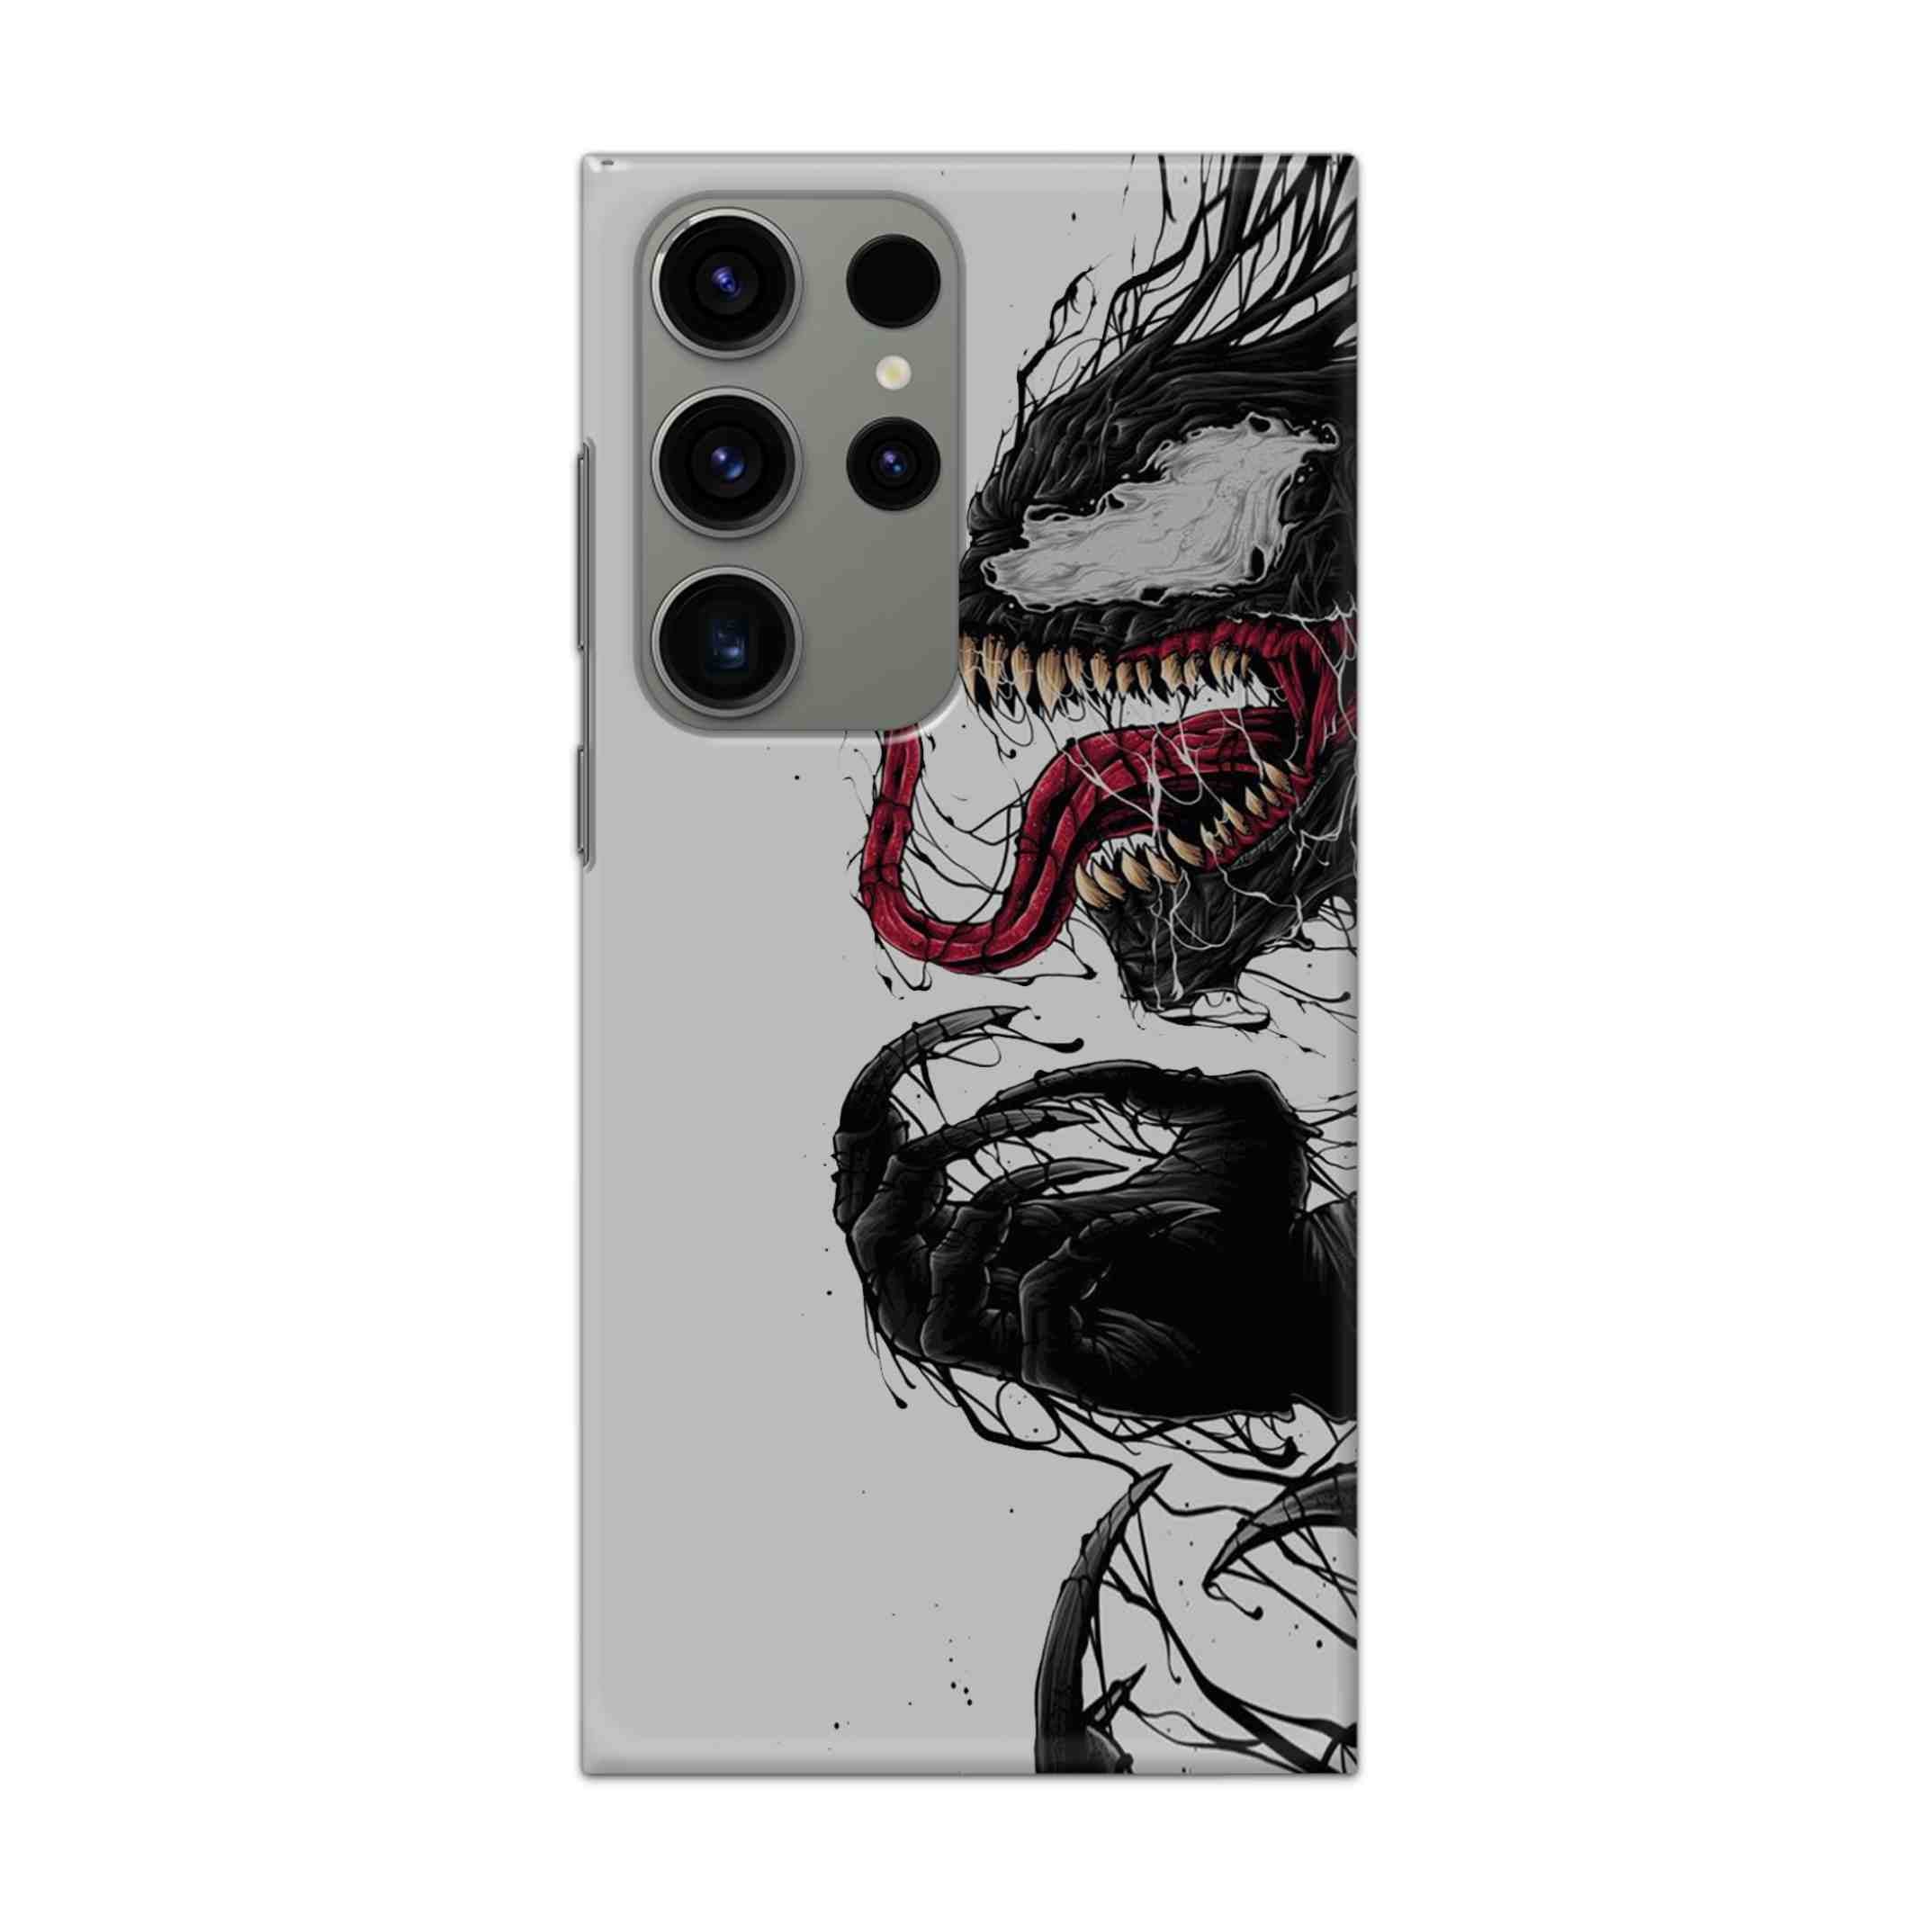 Buy Venom Crazy Hard Back Mobile Phone Case Cover For Samsung Galaxy S23 Ultra Online